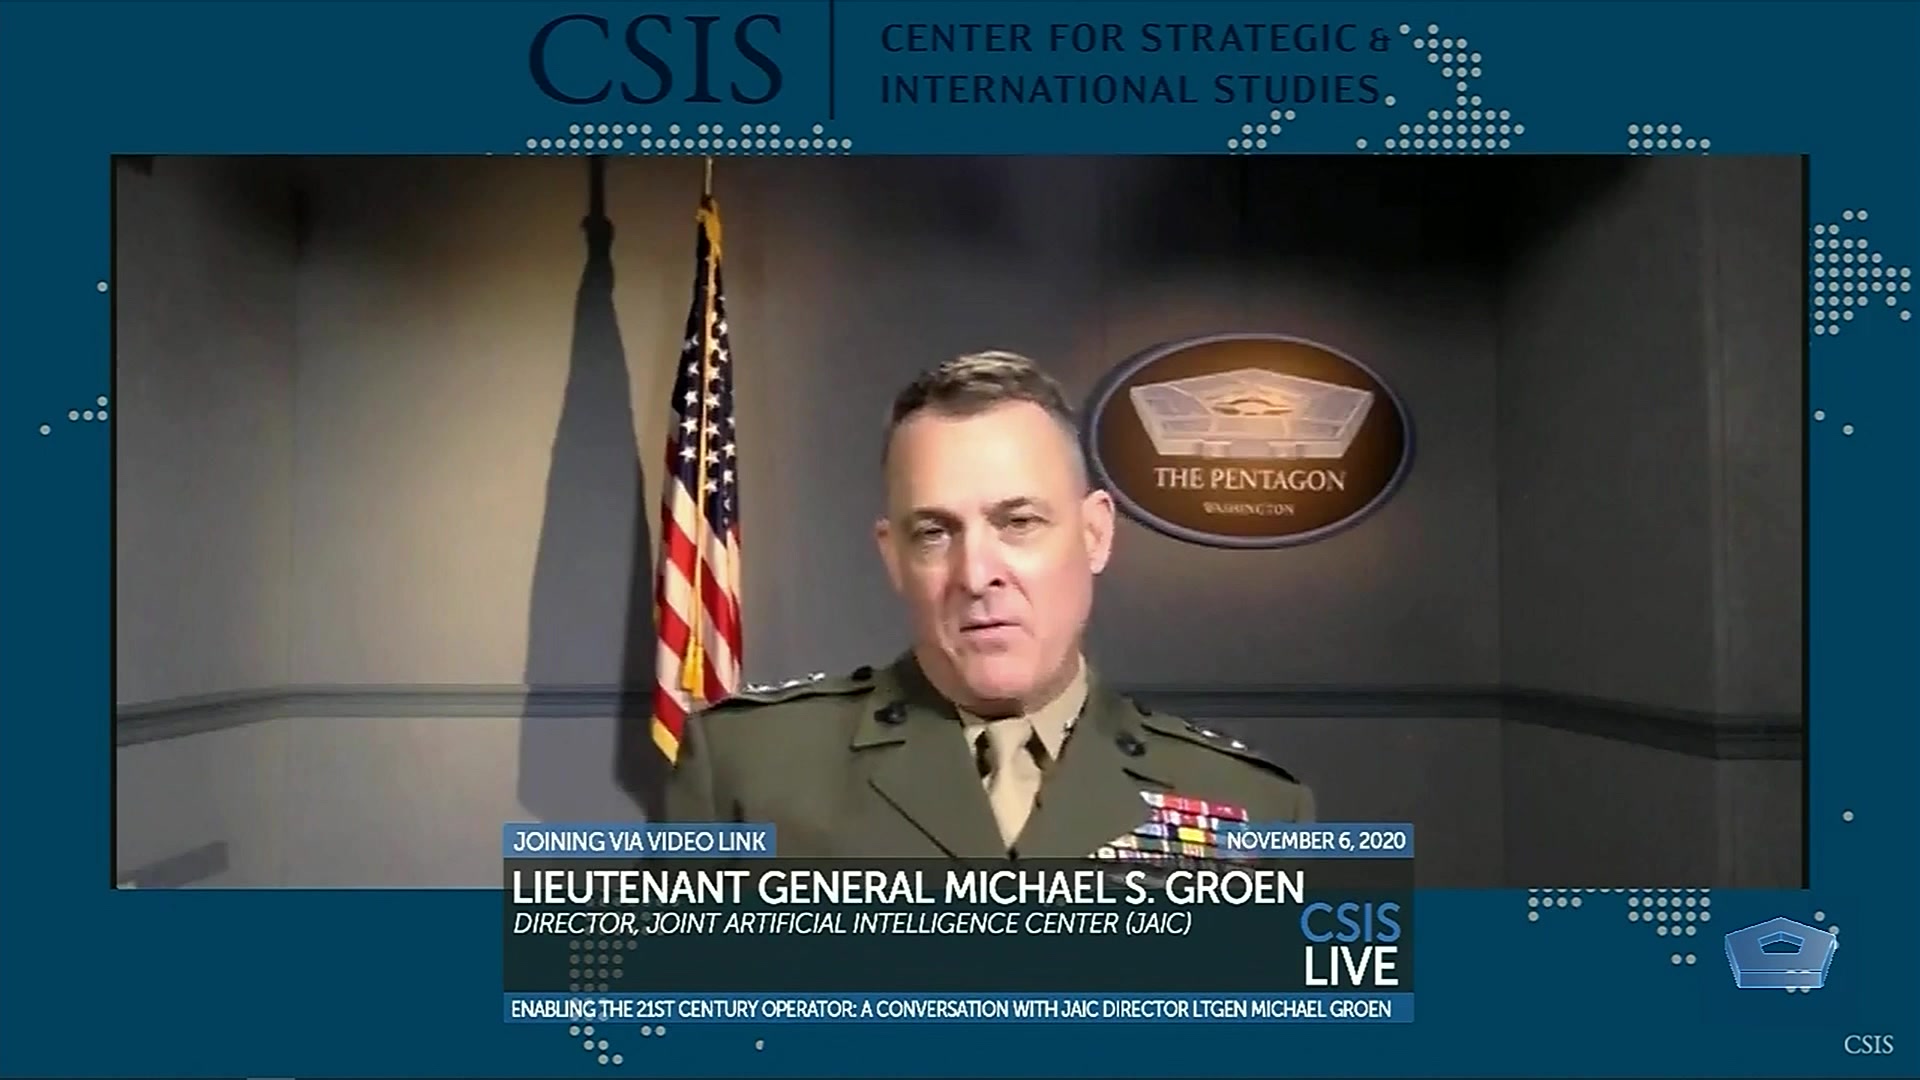 Marine Corps Lt. Gen. Michael S. Groen, director of the Joint Artificial Intelligence Center, speaks at the Center for Strategic and International Studies on how AI can better enable military operators and his top priorities for 2021 as JAIC director, Nov. 6, 2020.
